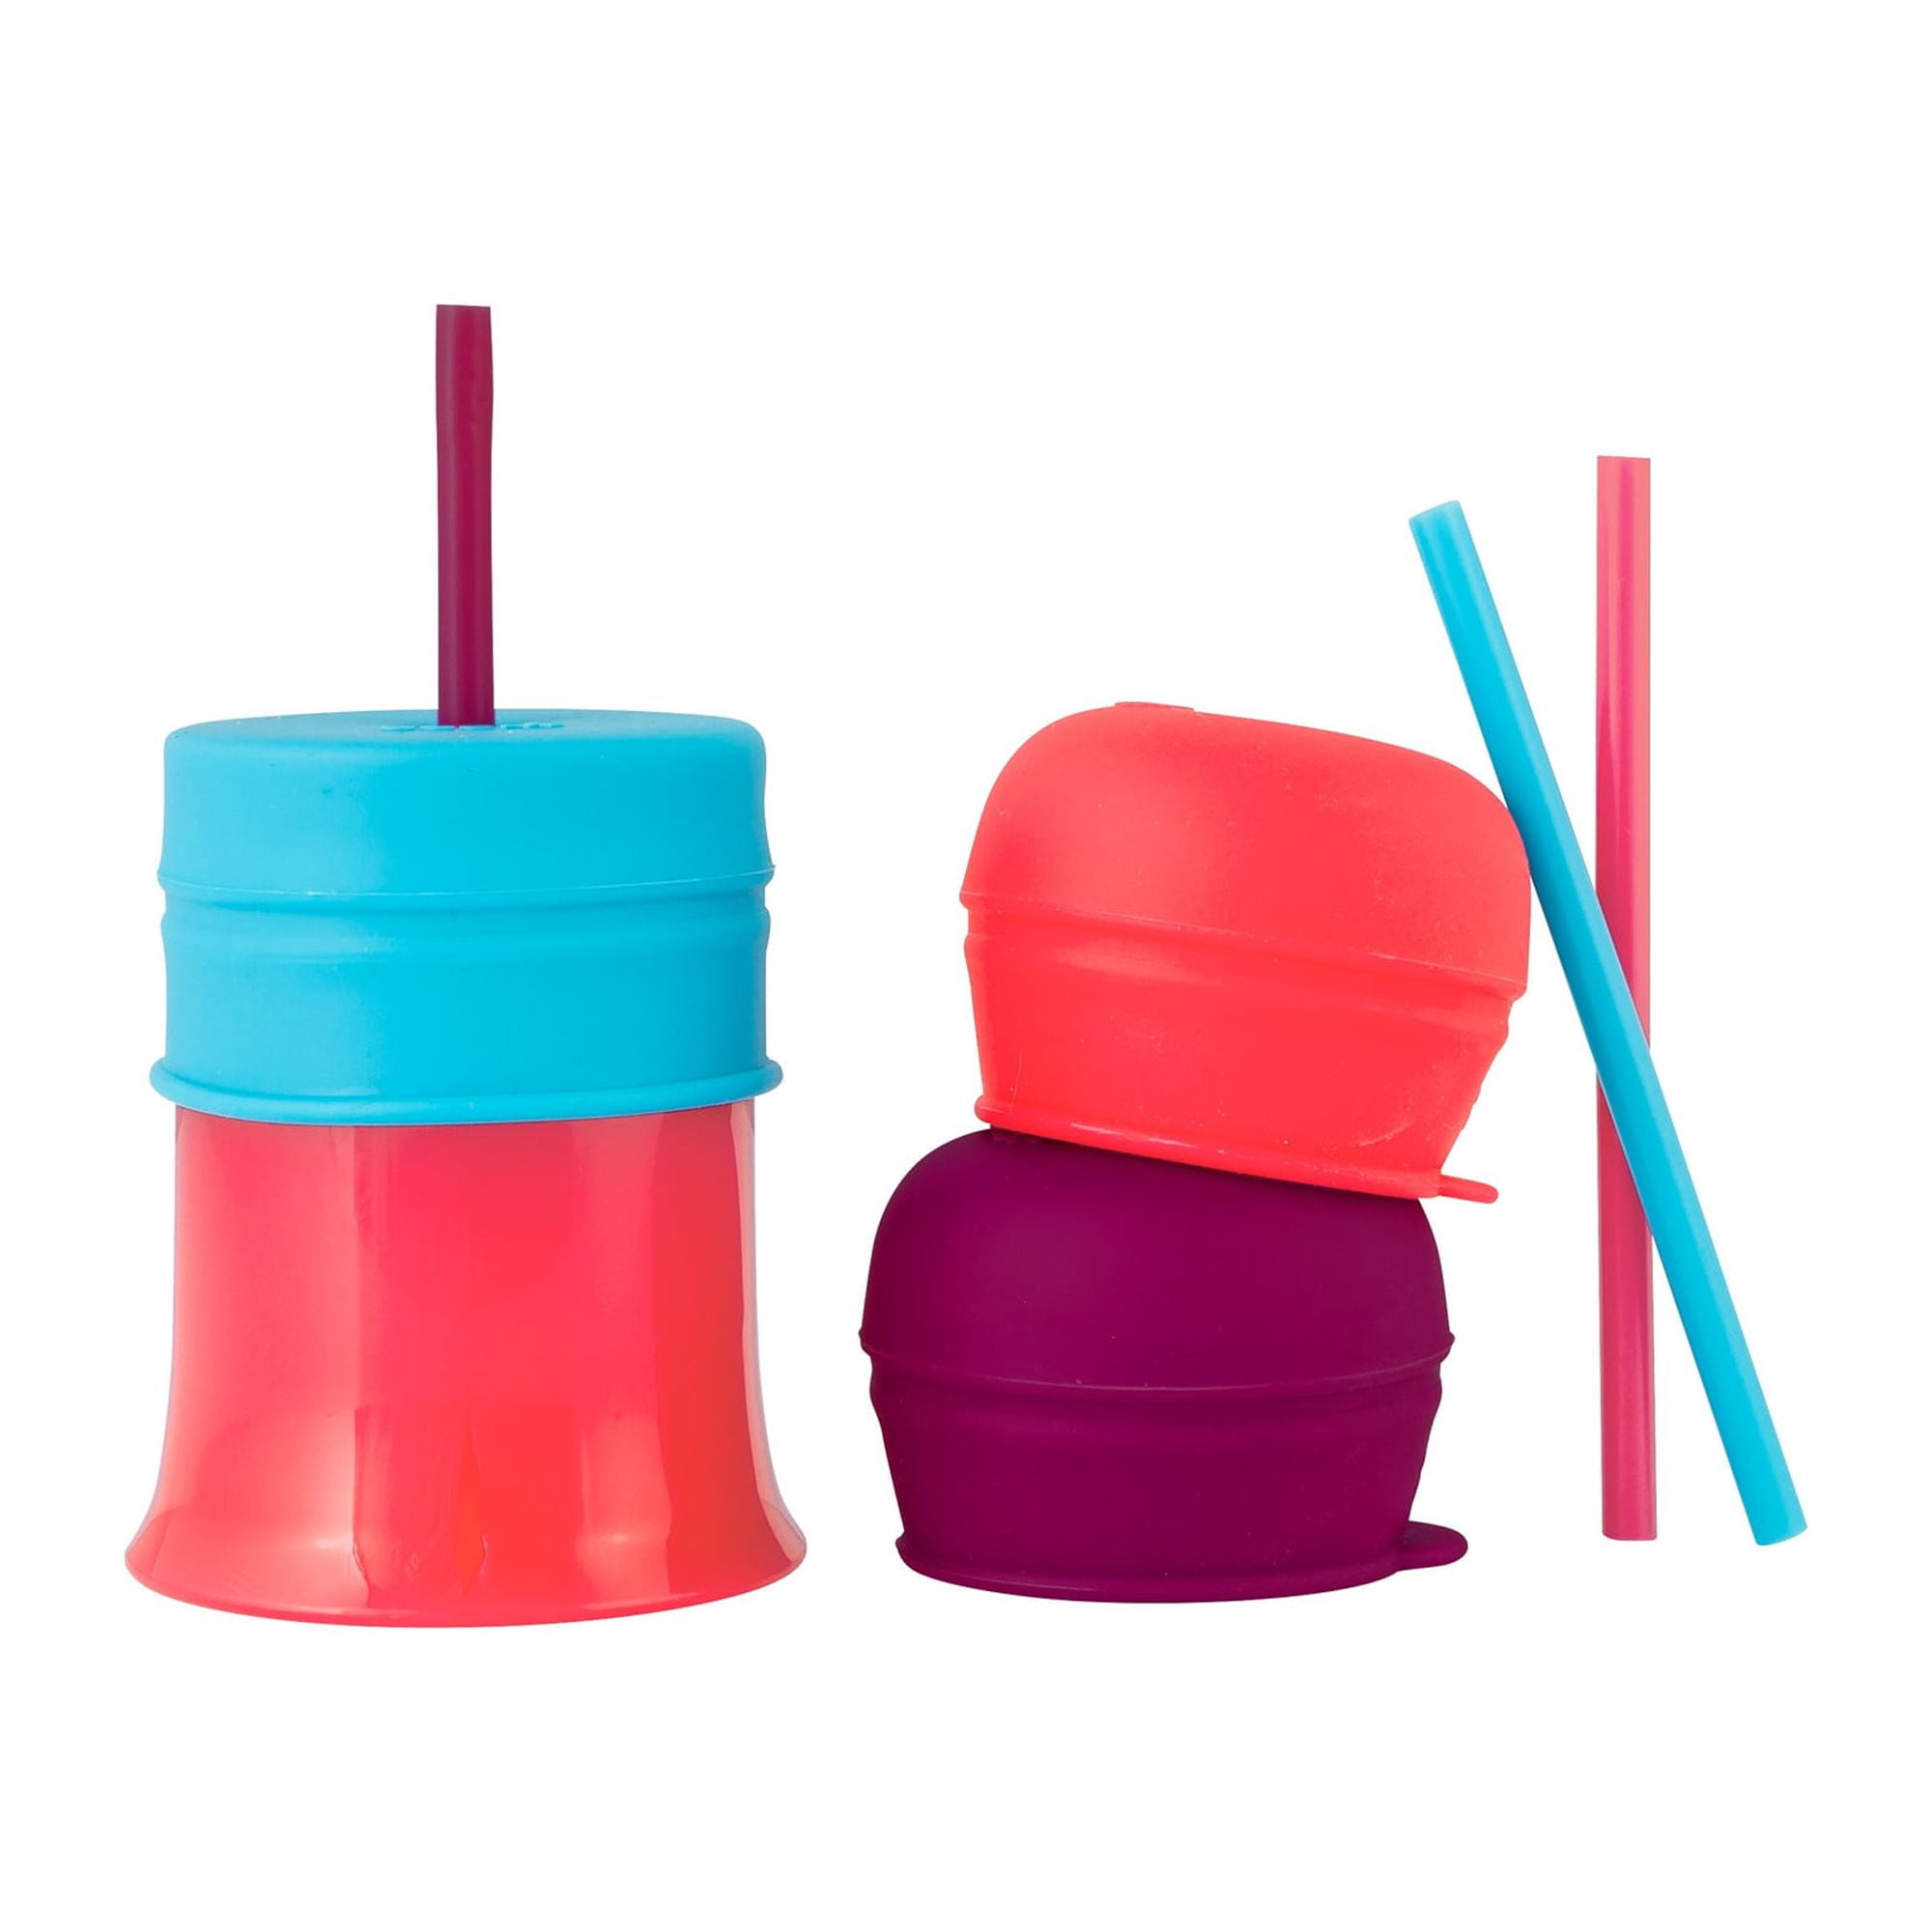 Along with our holiday swig cups, we have reusable straws + straw toppers!!  😍